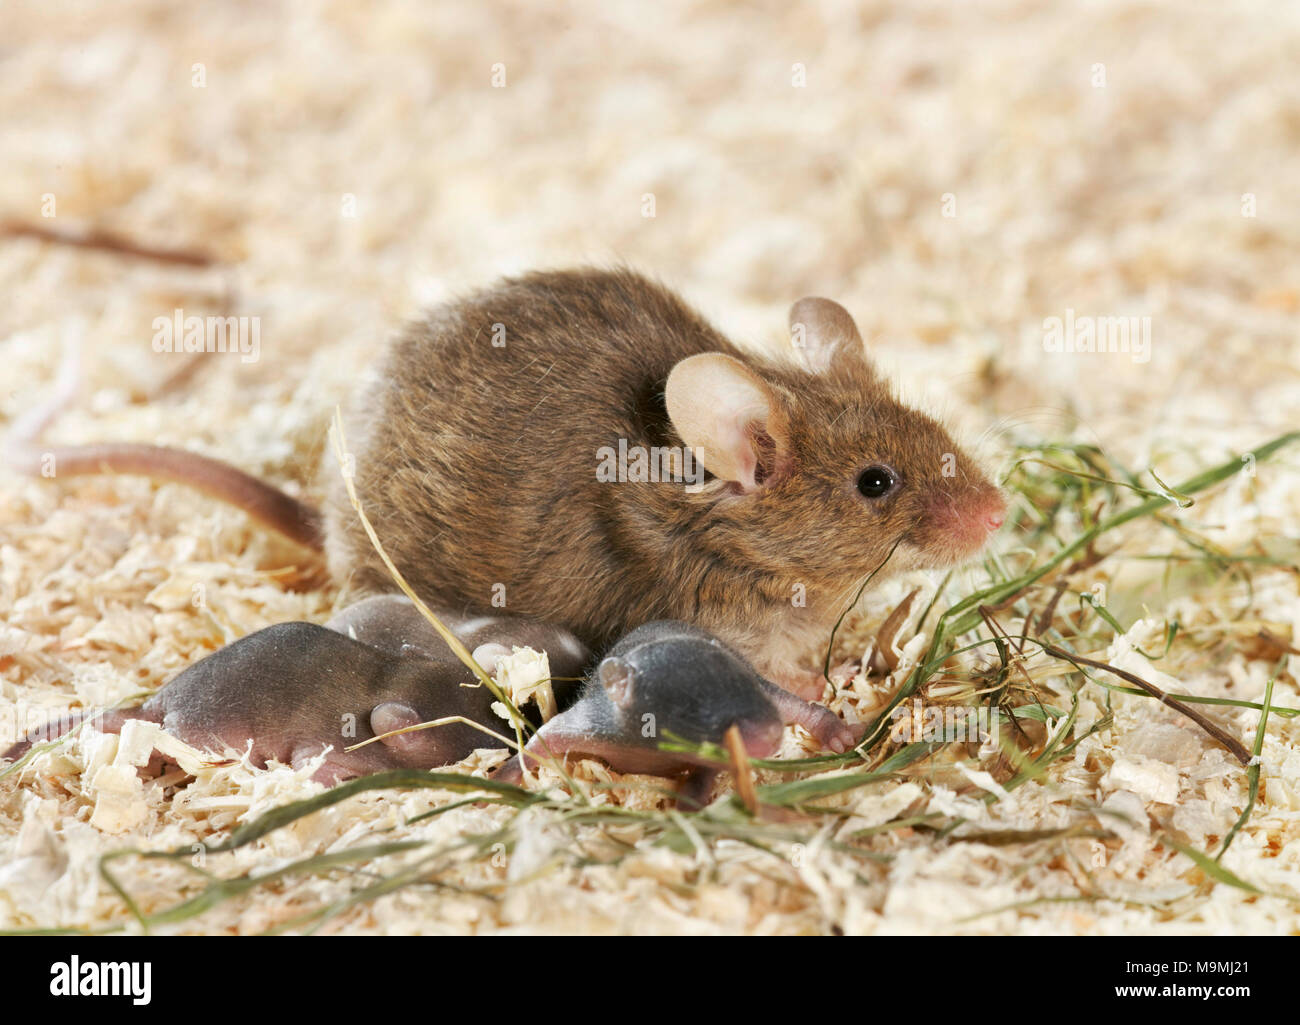 Fancy Mouse. Mother and young (7 days old) in wood shavings. Germany. Stock Photo